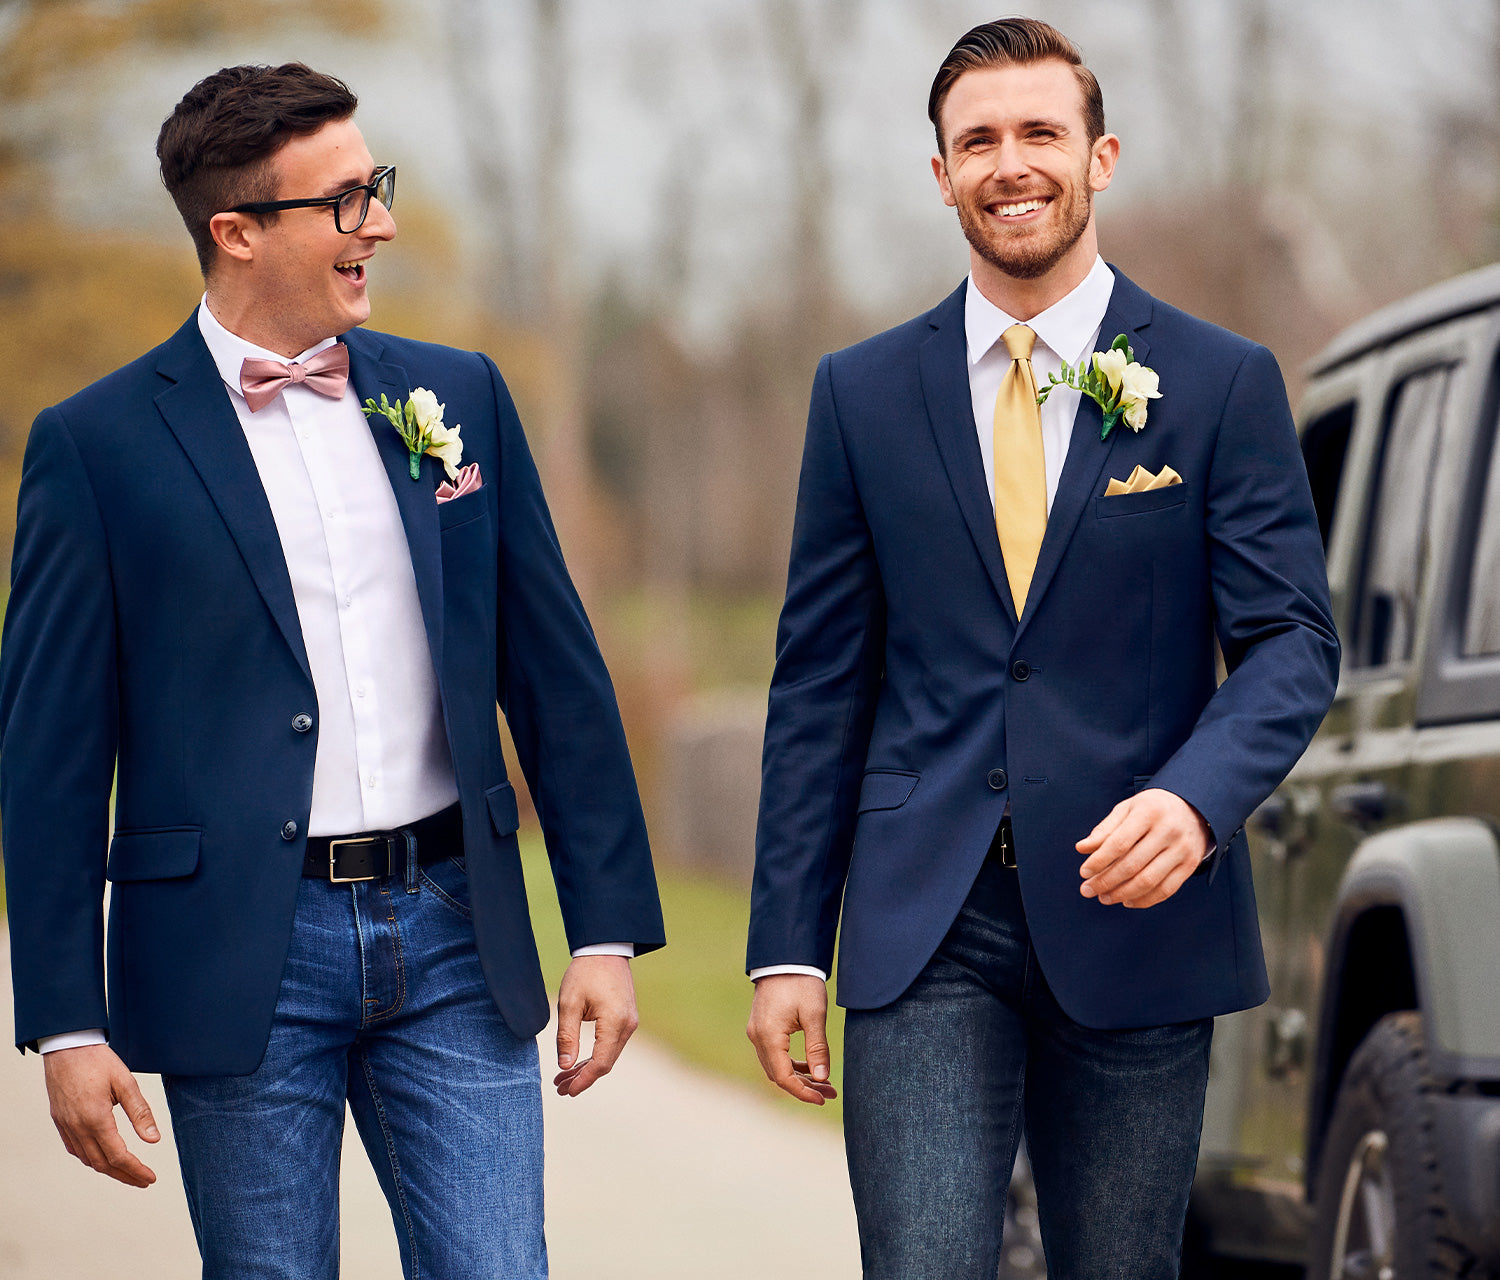 Don’t Upstage The Groom | Be the Second Best-Looking Guy at the Wedding